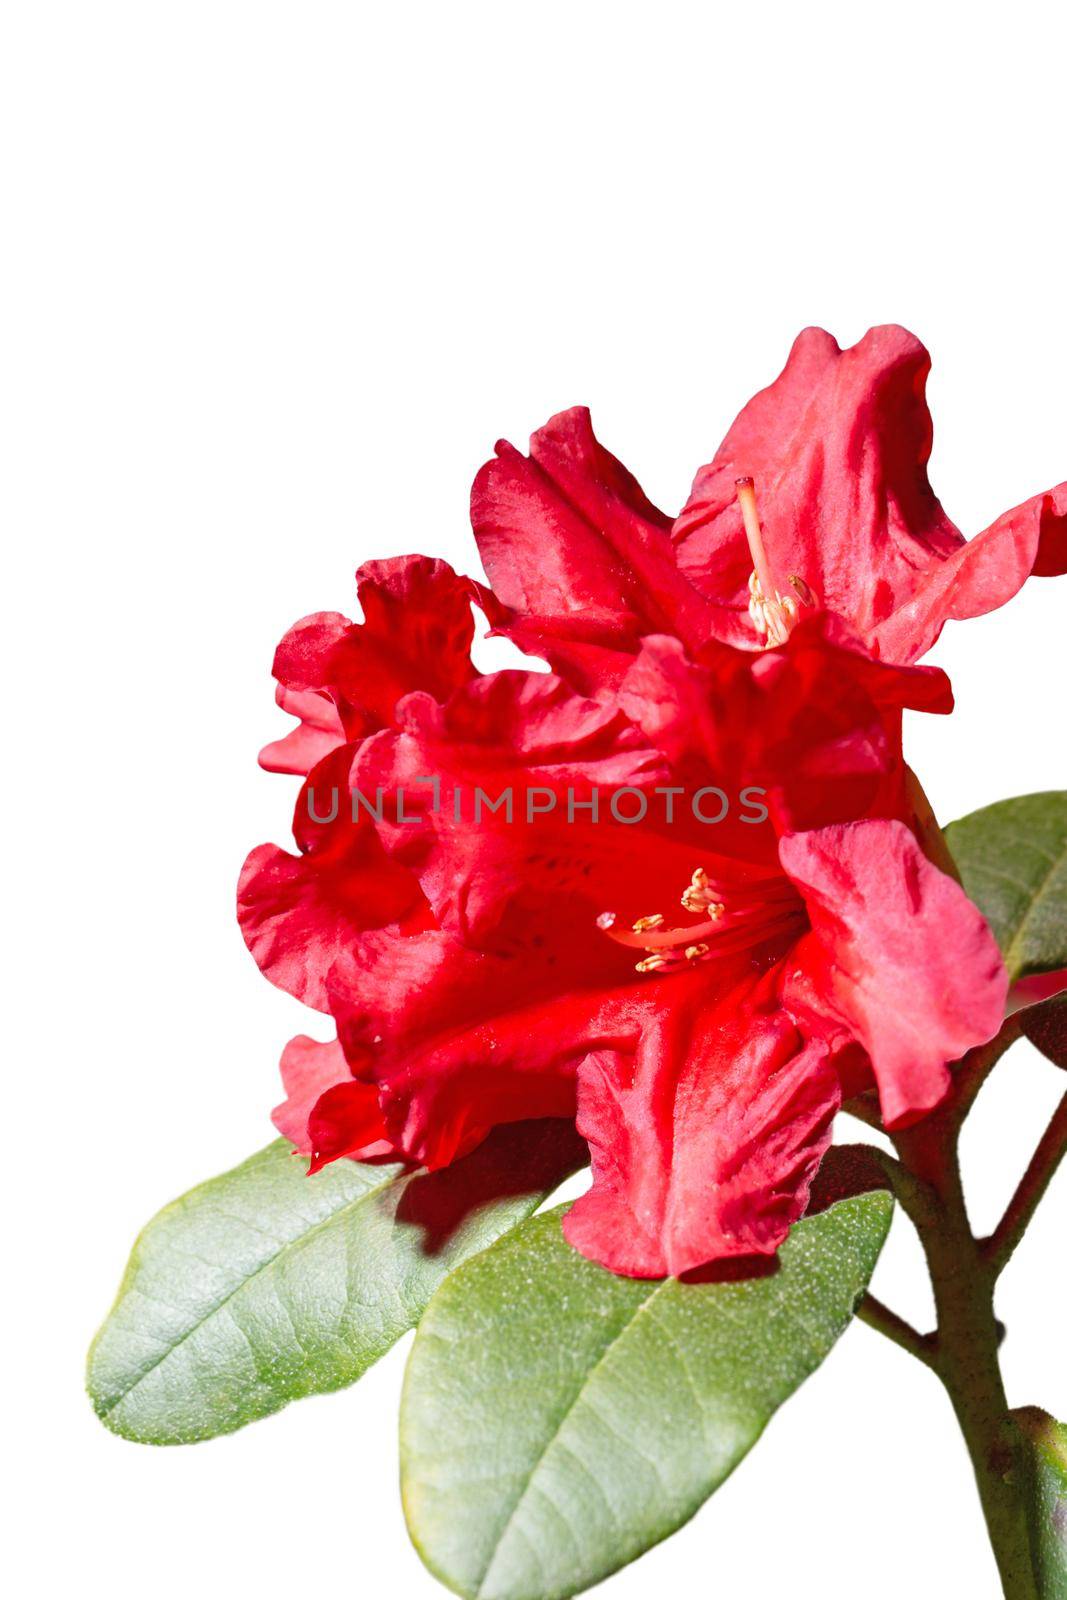 Crimson red rhododendron flower isolated on white background. Close-up macro view